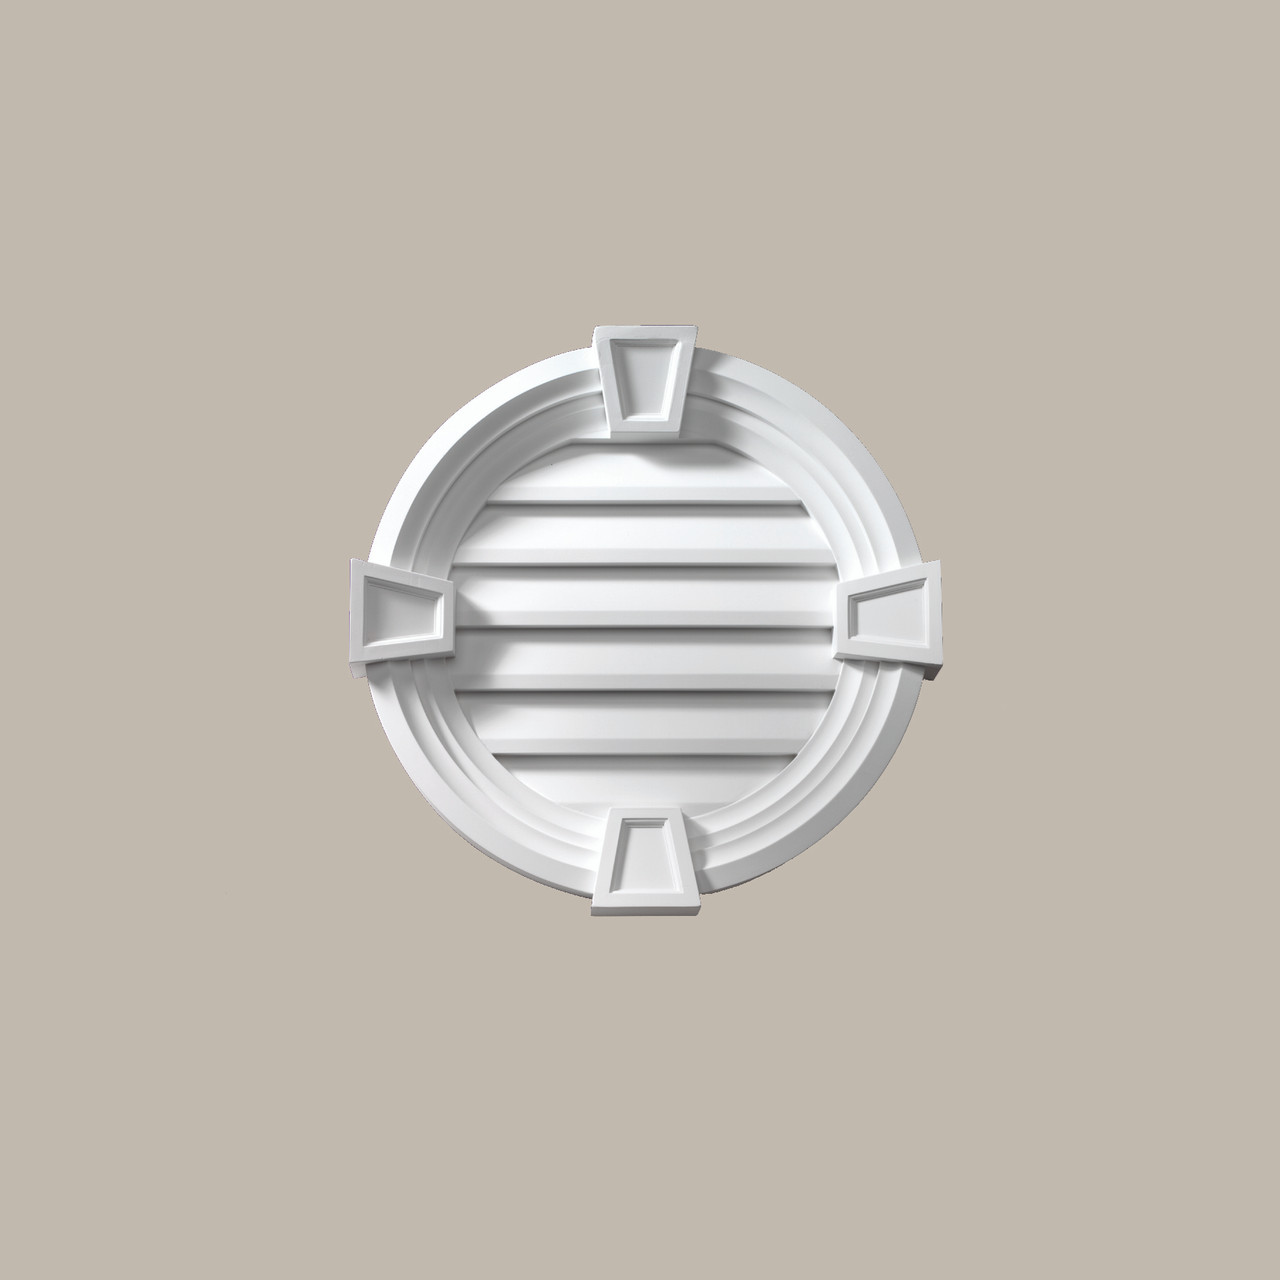 FRLV30MTK Functional Standard Keystone Round Louver Vent with Decorative Trim - 30" Diameter